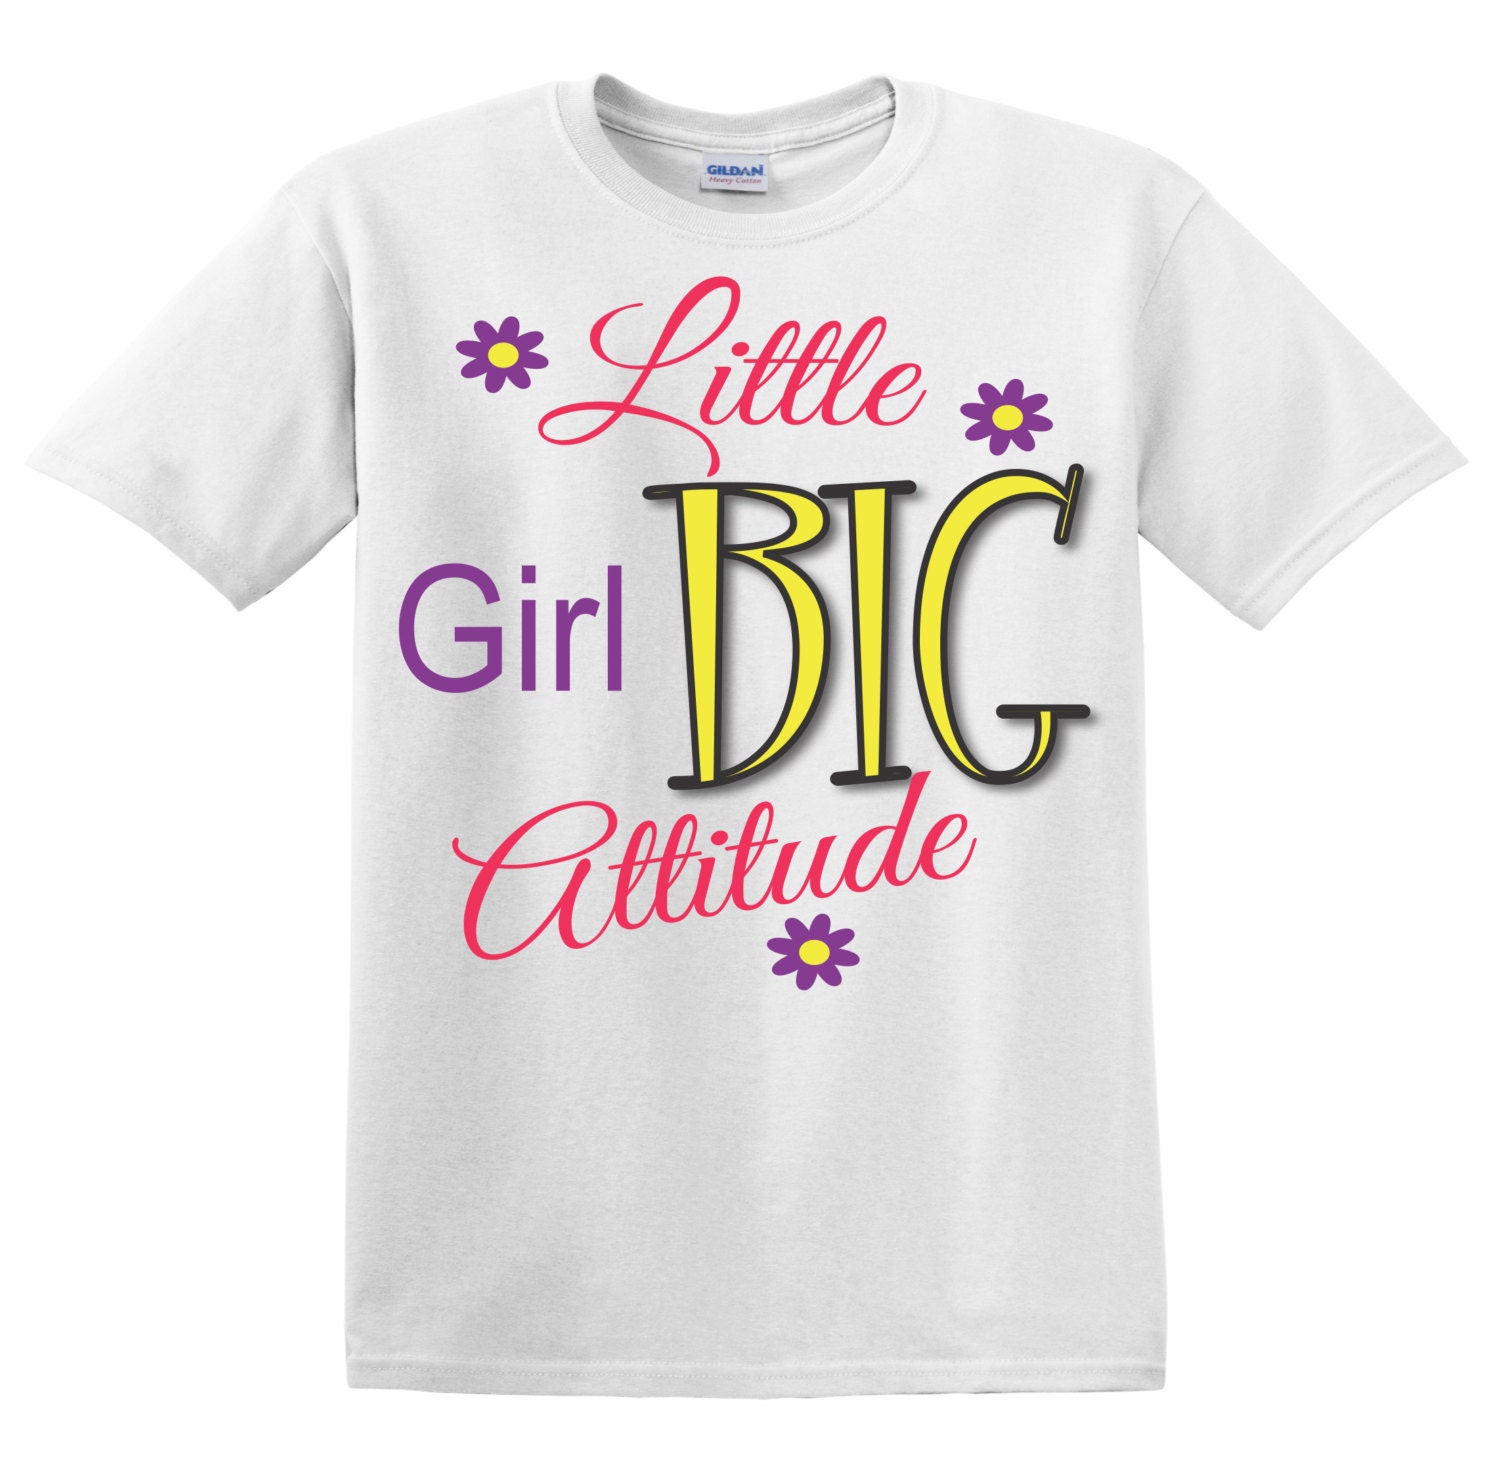 Little Girl with a Big Attitude Tee